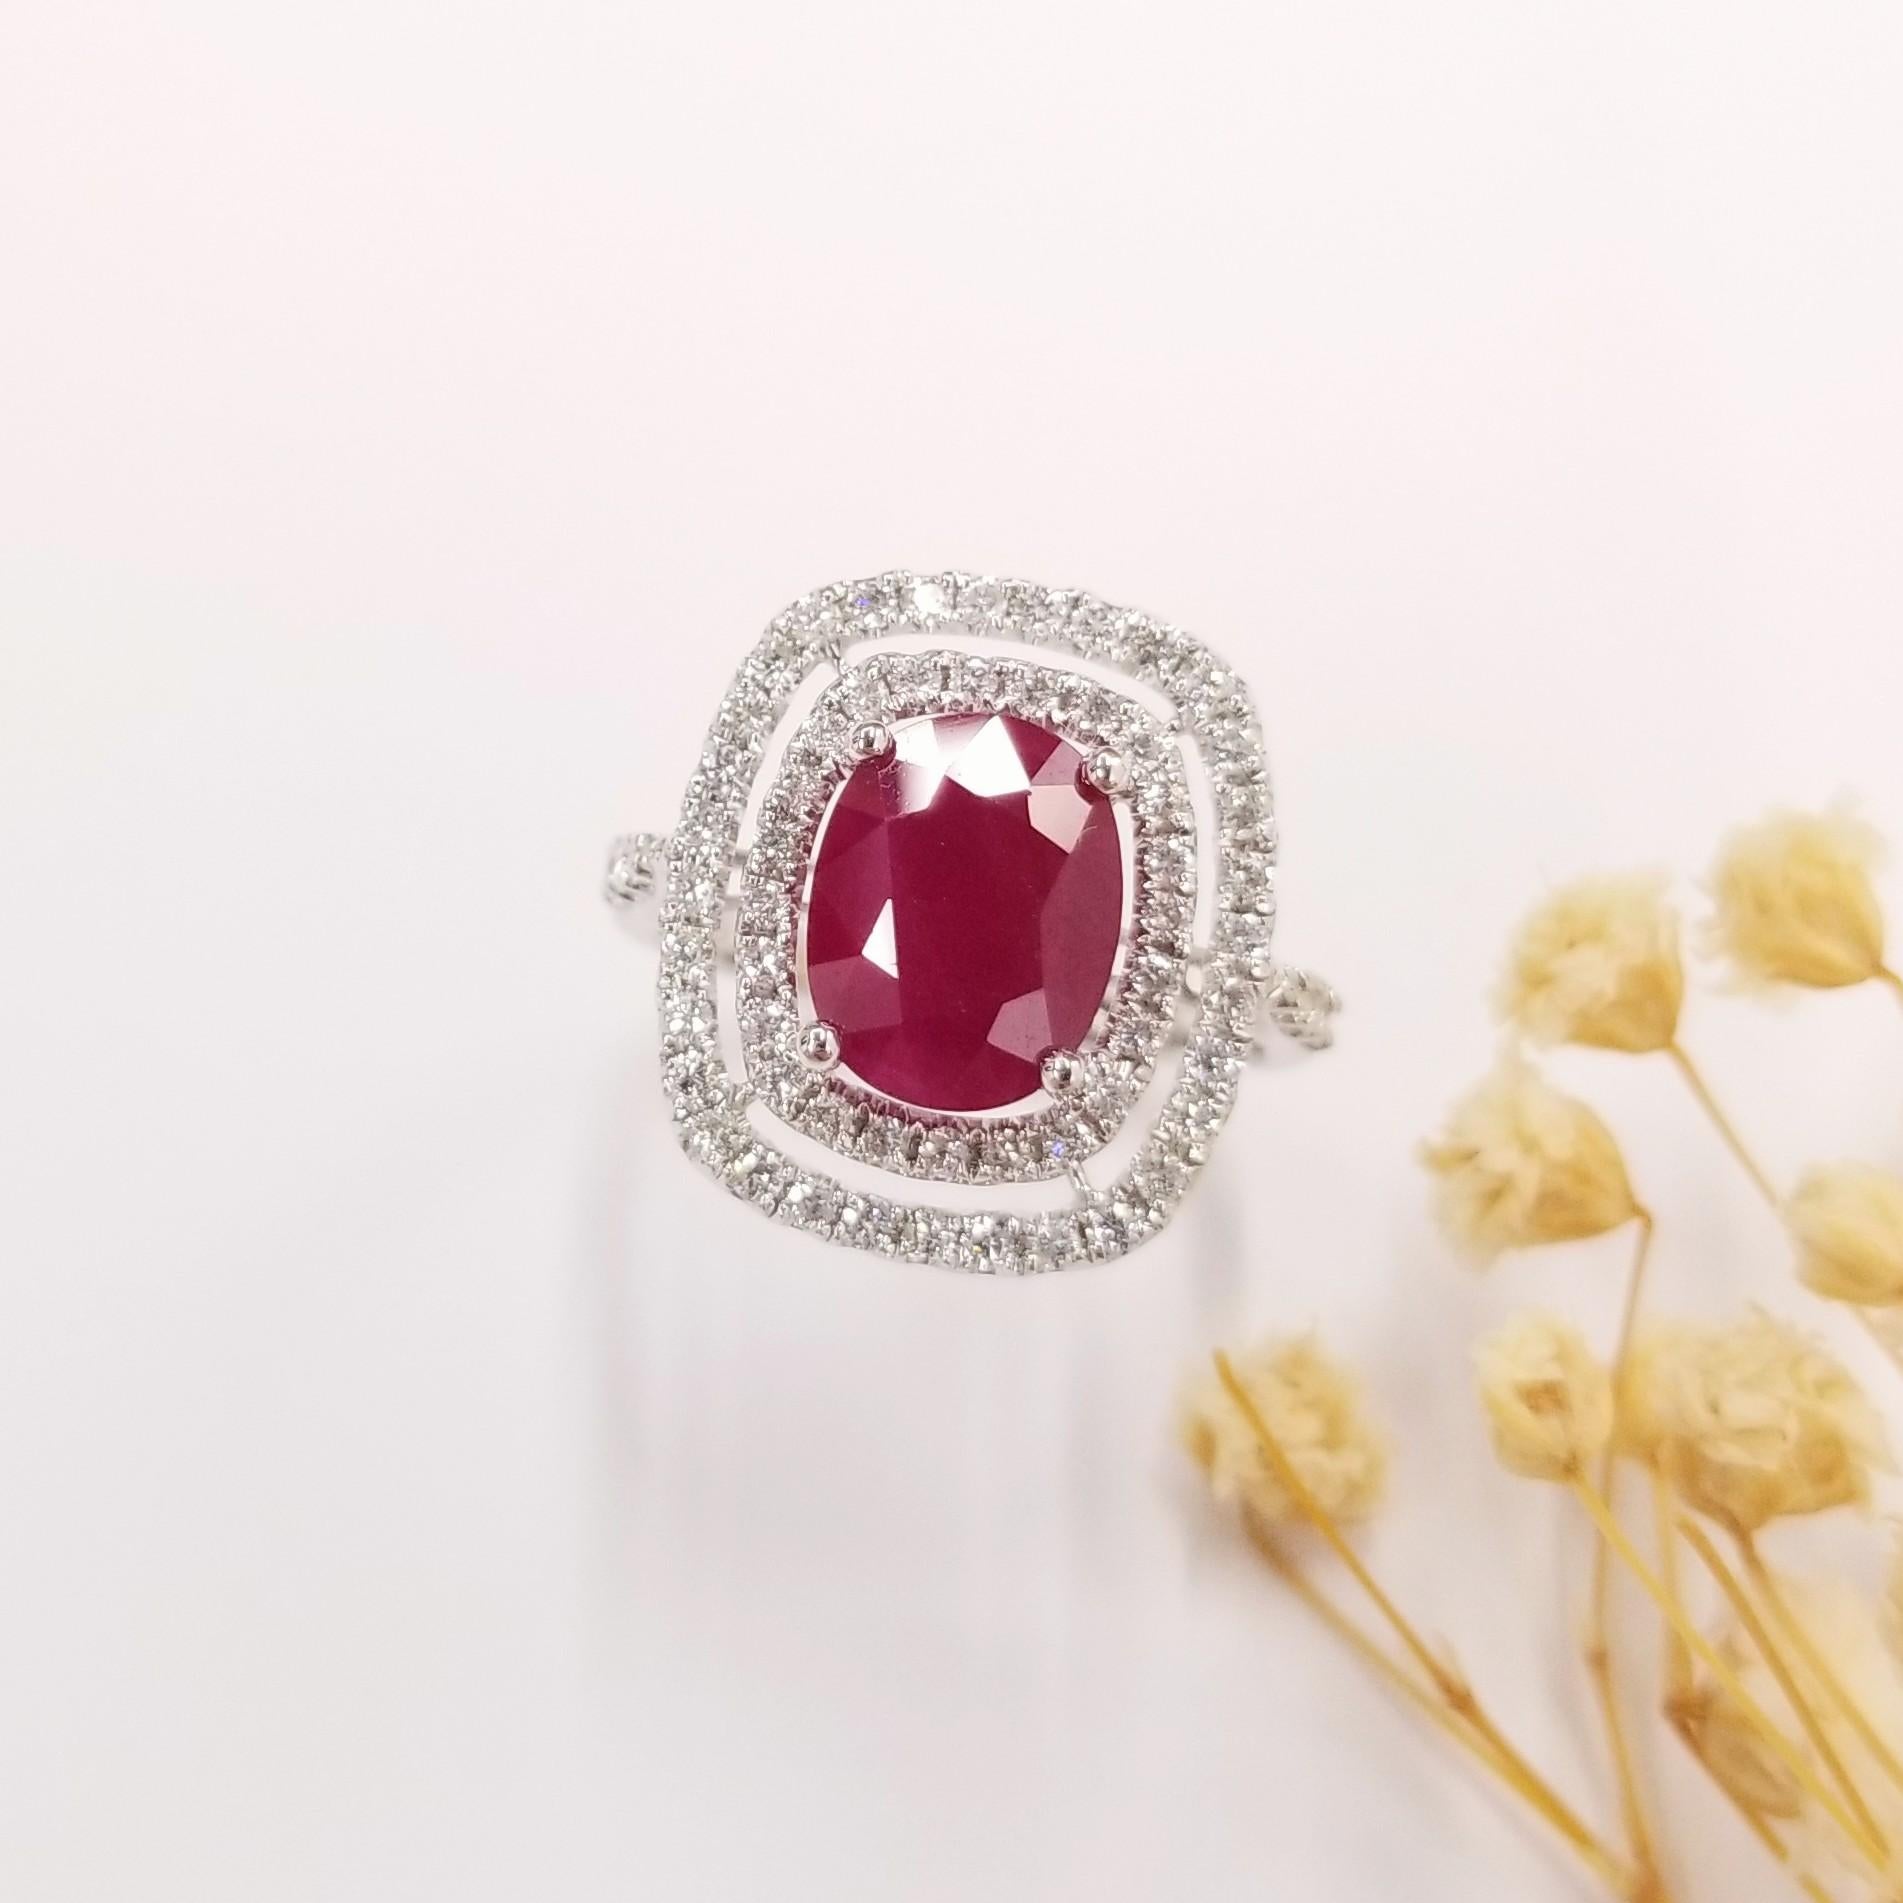 IGI Certified 3.05Carat Ruby & Diamond Ring in 18K White Gold In New Condition For Sale In KOWLOON, HK